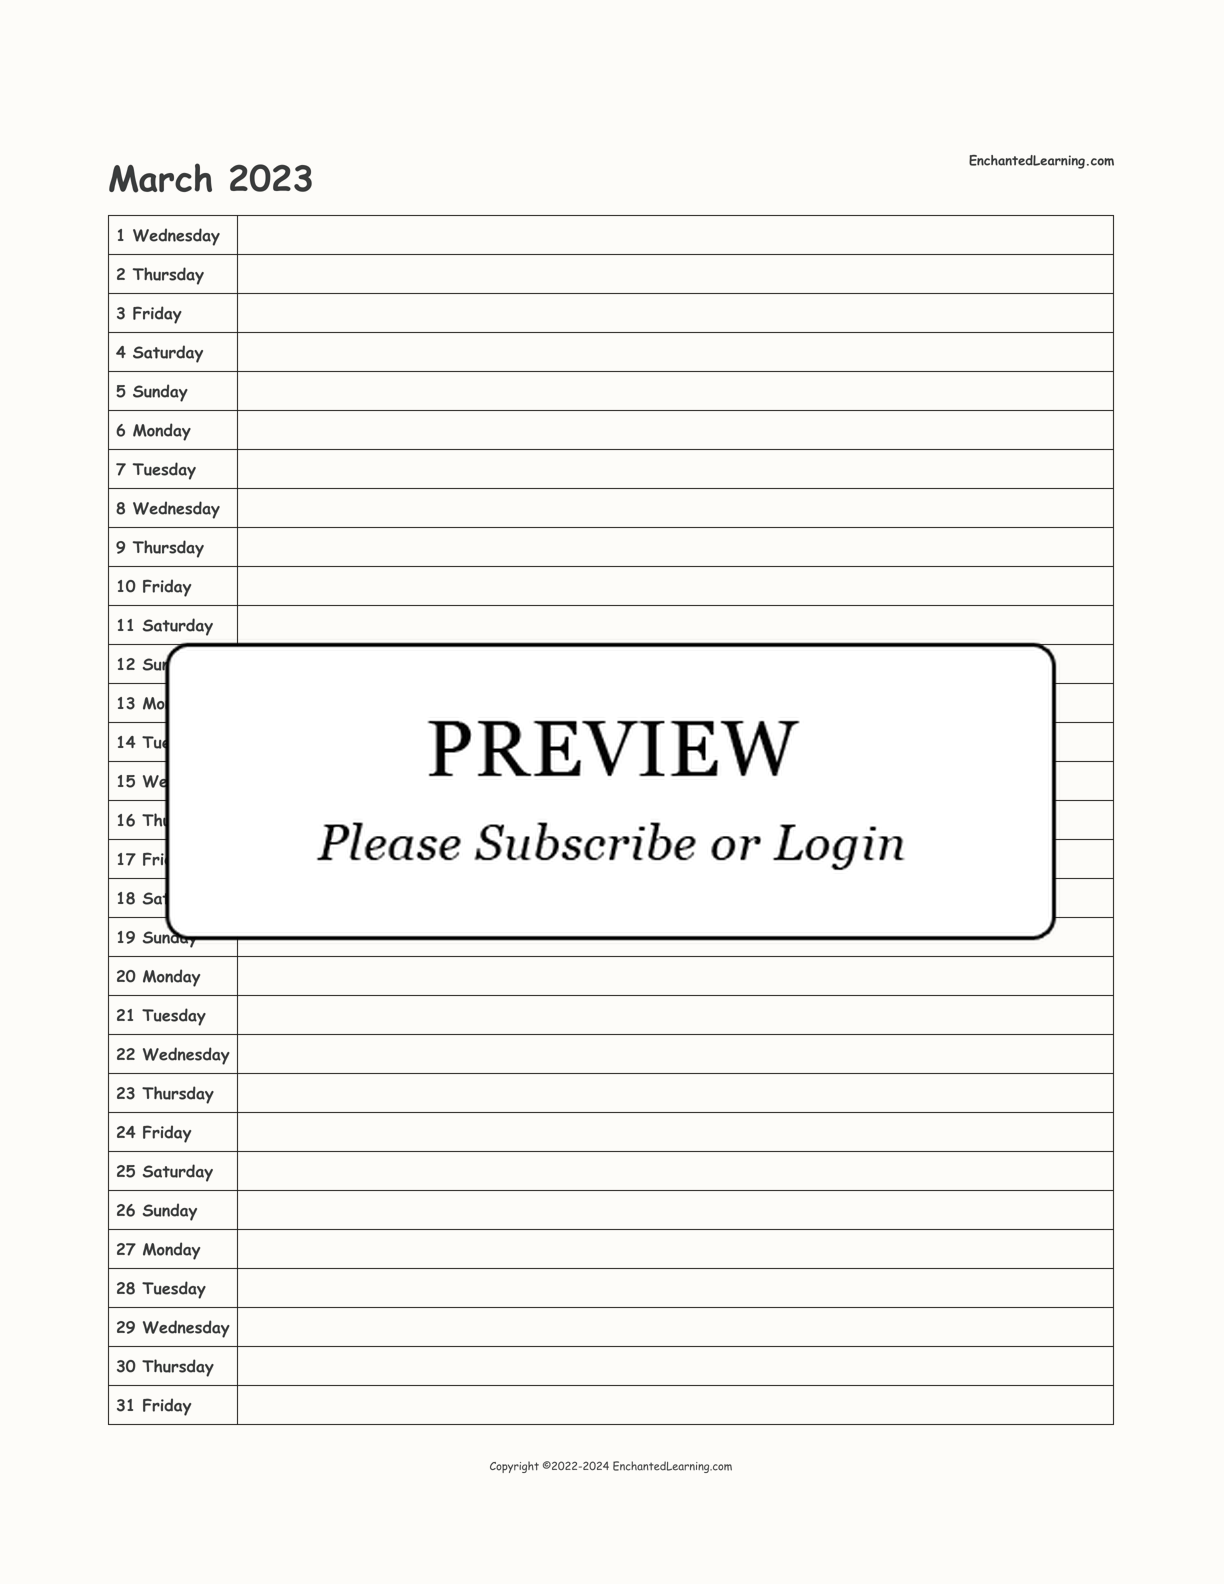 2023 Scheduling Calendar interactive printout page 3